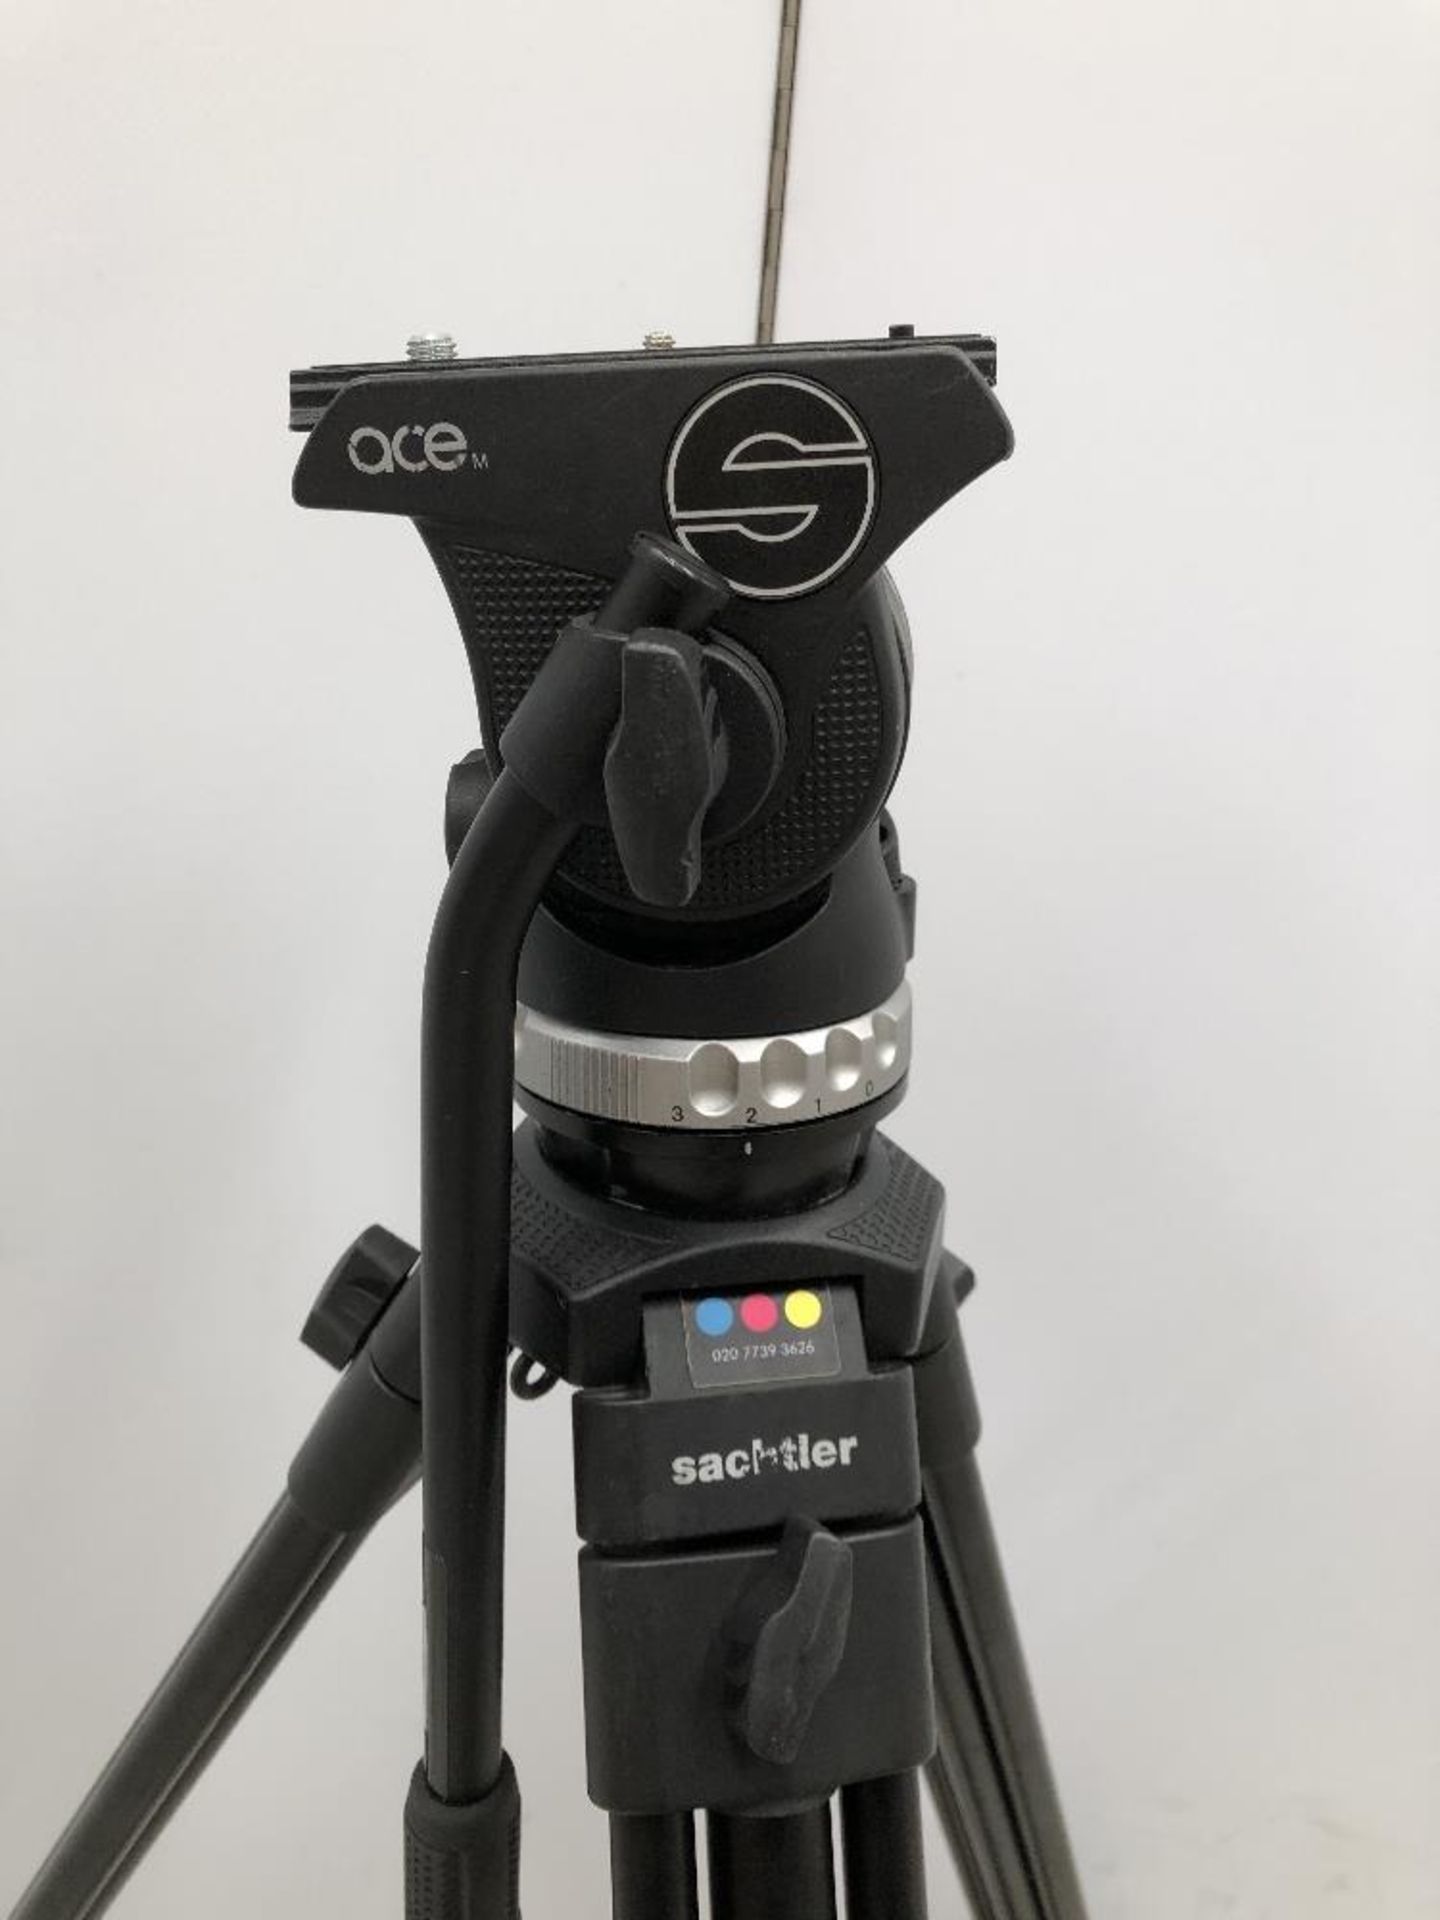 Sachtler Ace M Telescopic Tripod With Fluid head And Carry Bag - Image 2 of 6